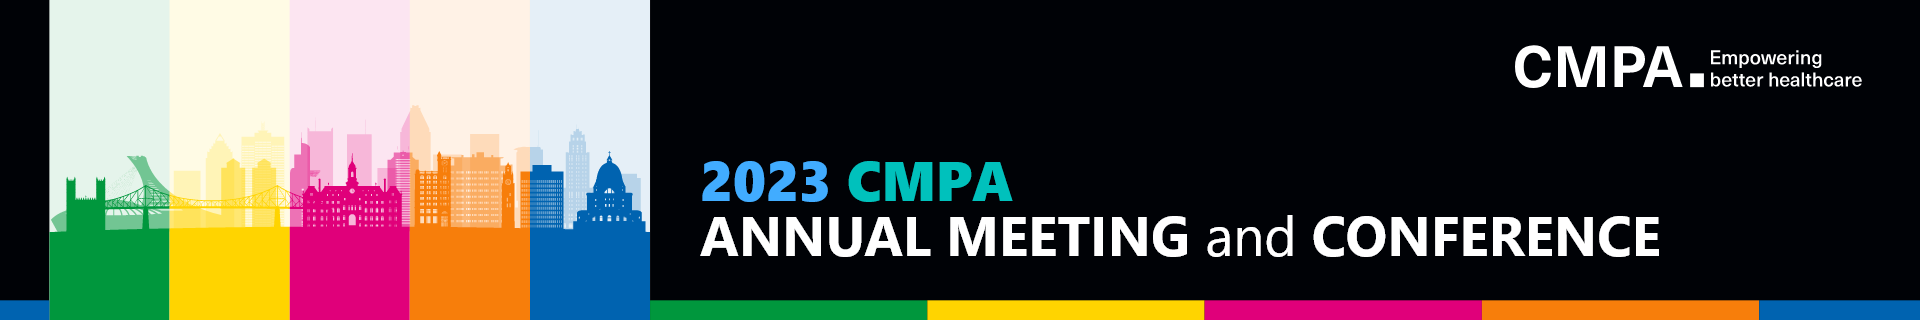 2023 CMPA Annual Meeting and Conference